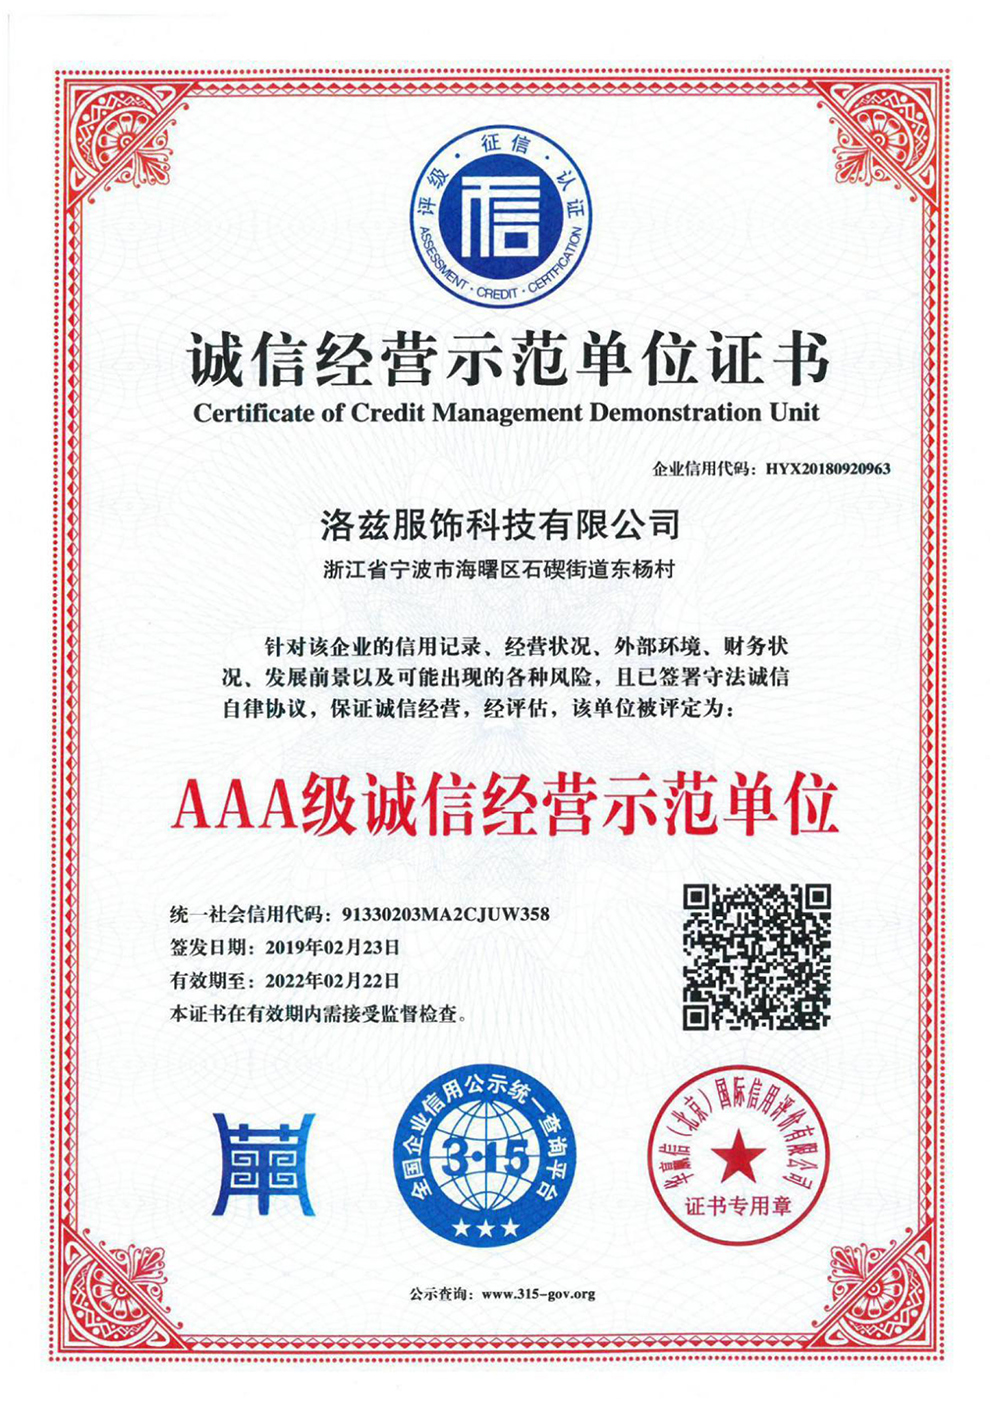 Certificate of good faith operation demonstration unit